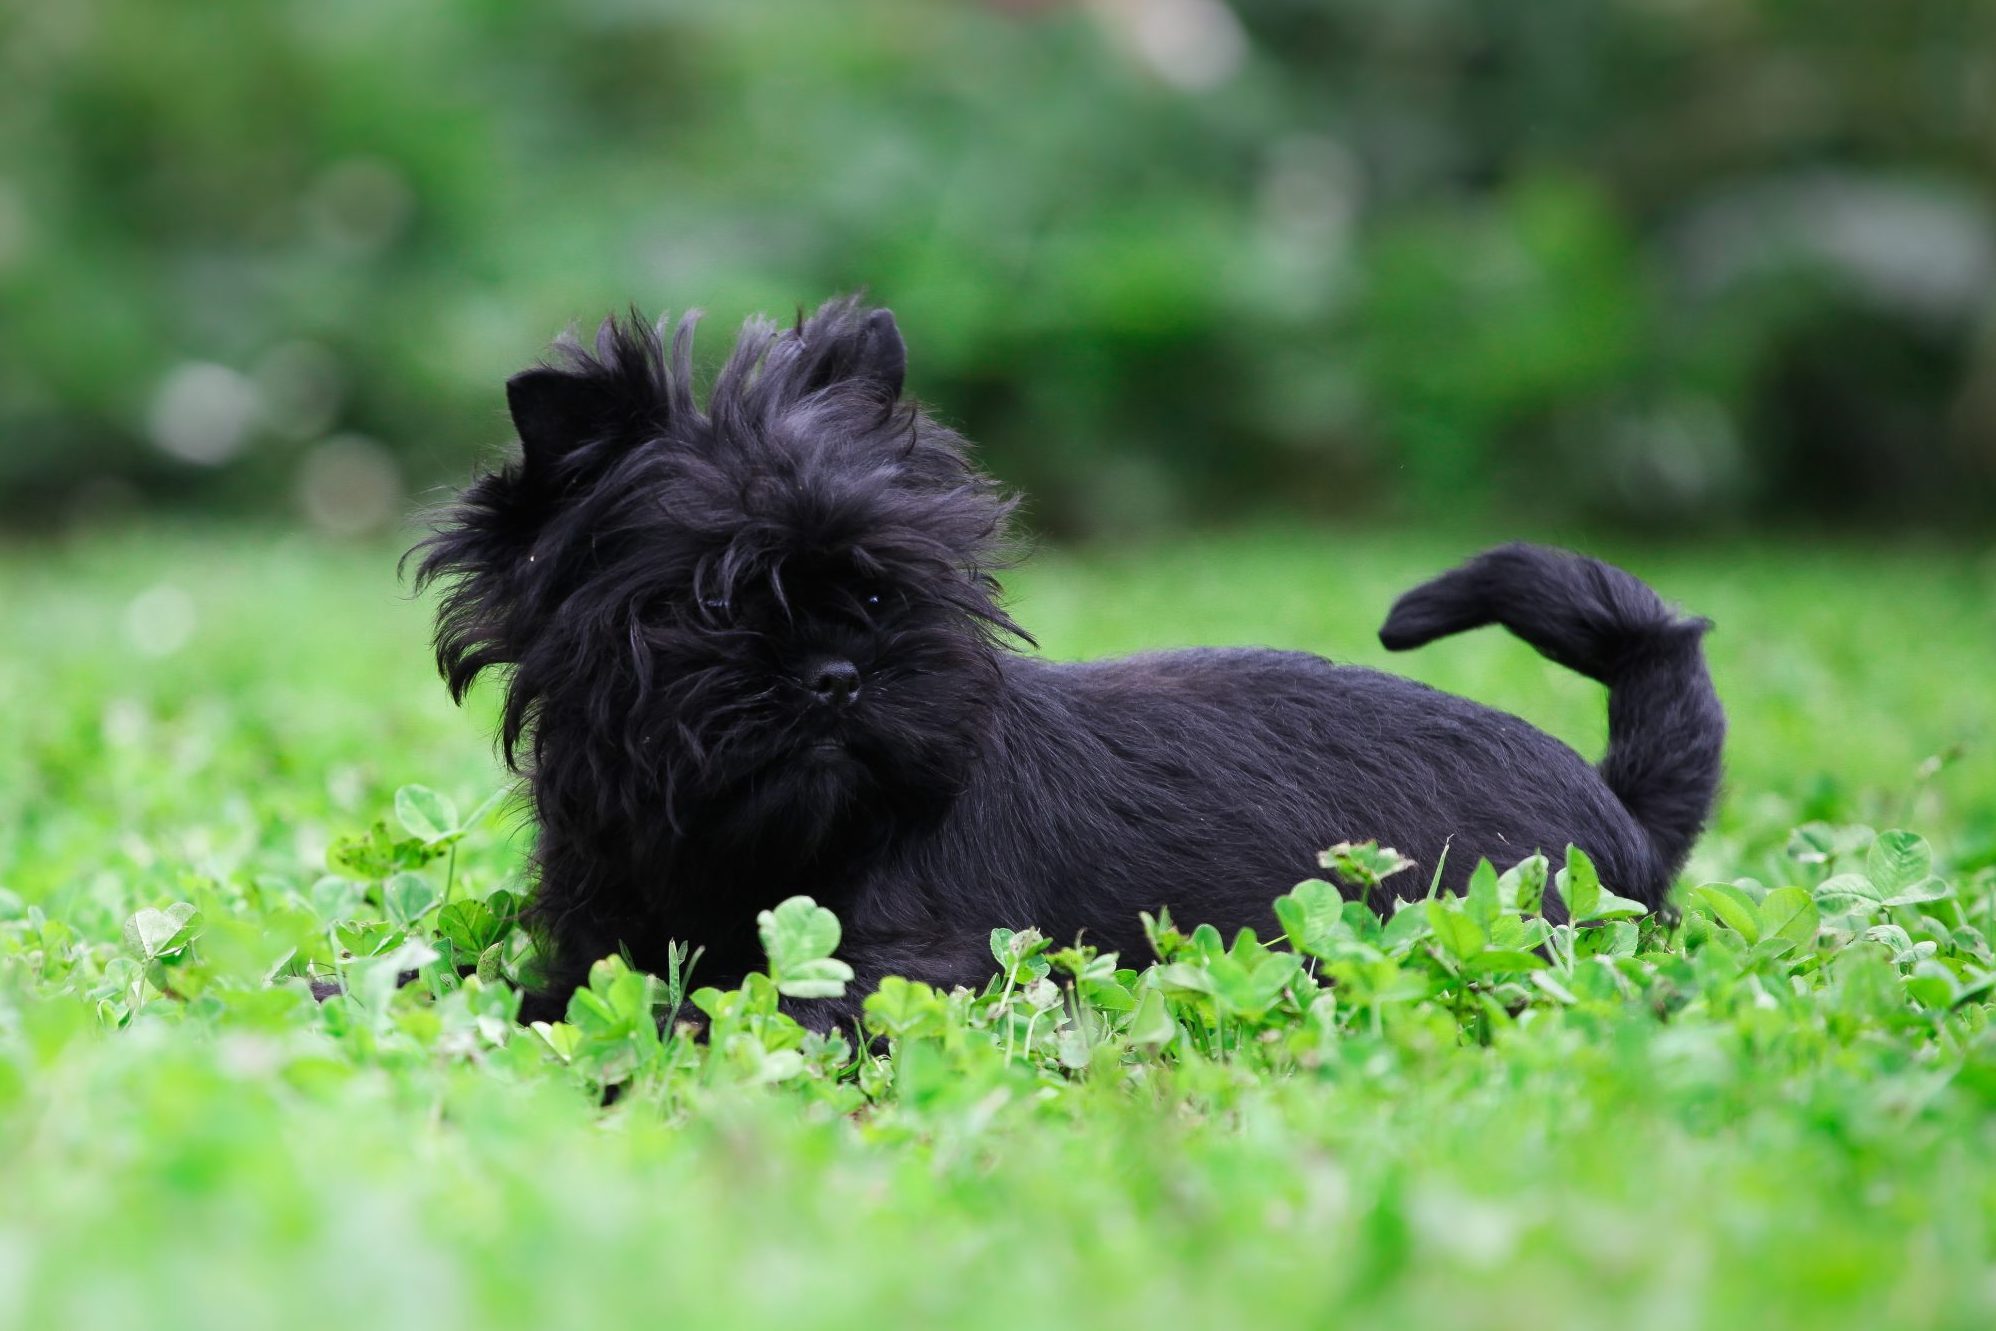 https://www.rd.com/wp-content/uploads/2019/05/Funny-Affenpinscher-playing-in-the-garden-scaled-e1643224730608.jpg?fit=700%2C467